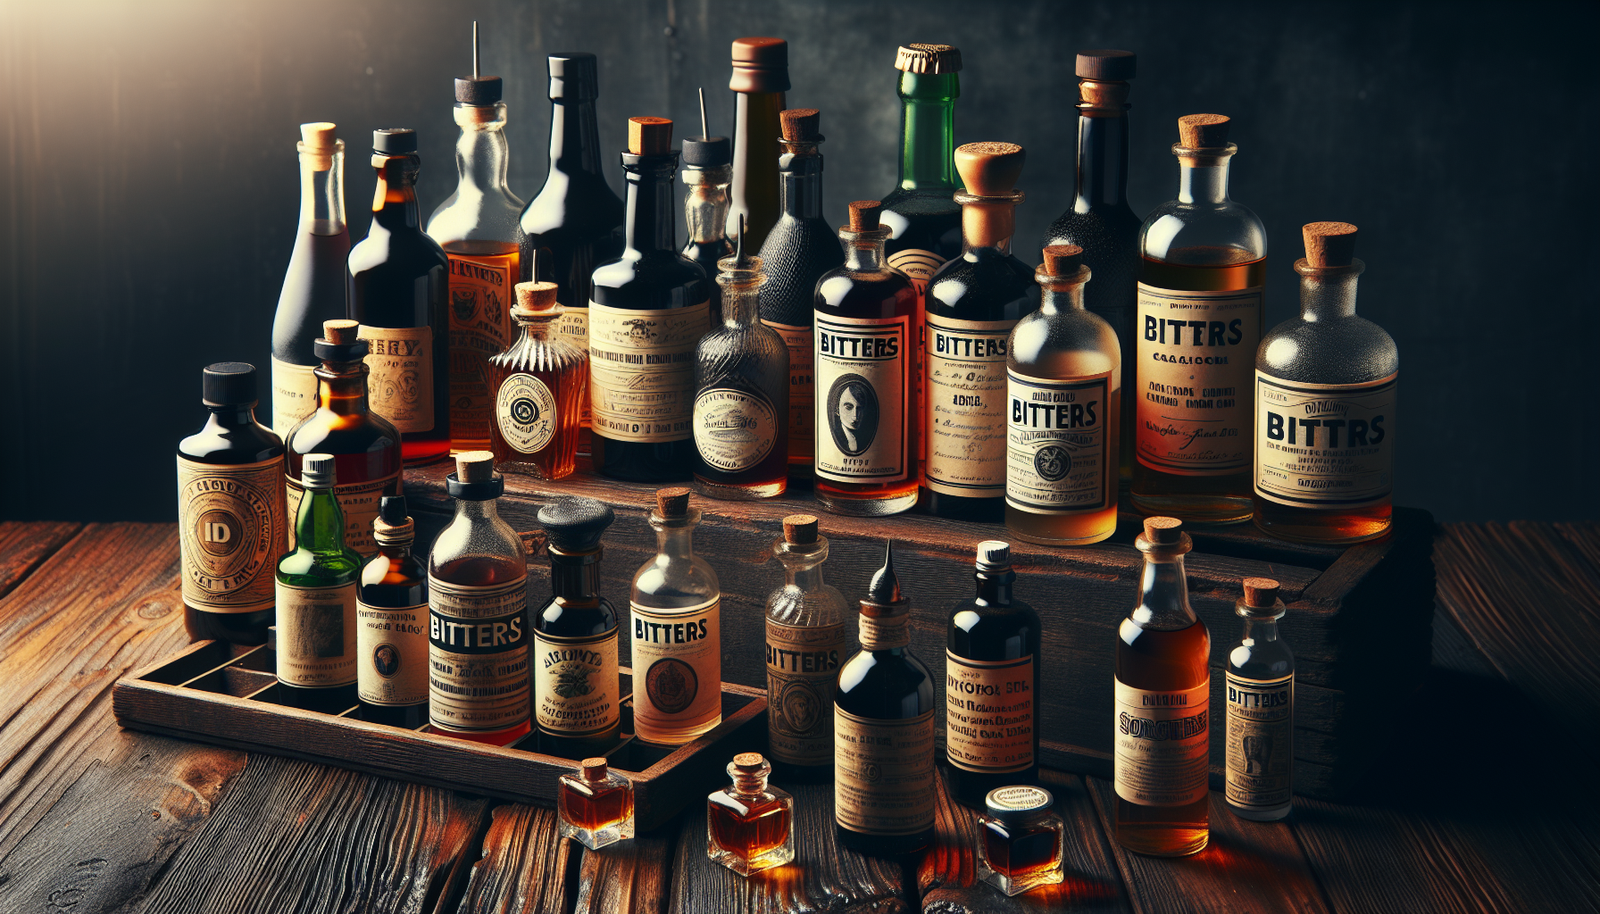 Where To Buy Bitters